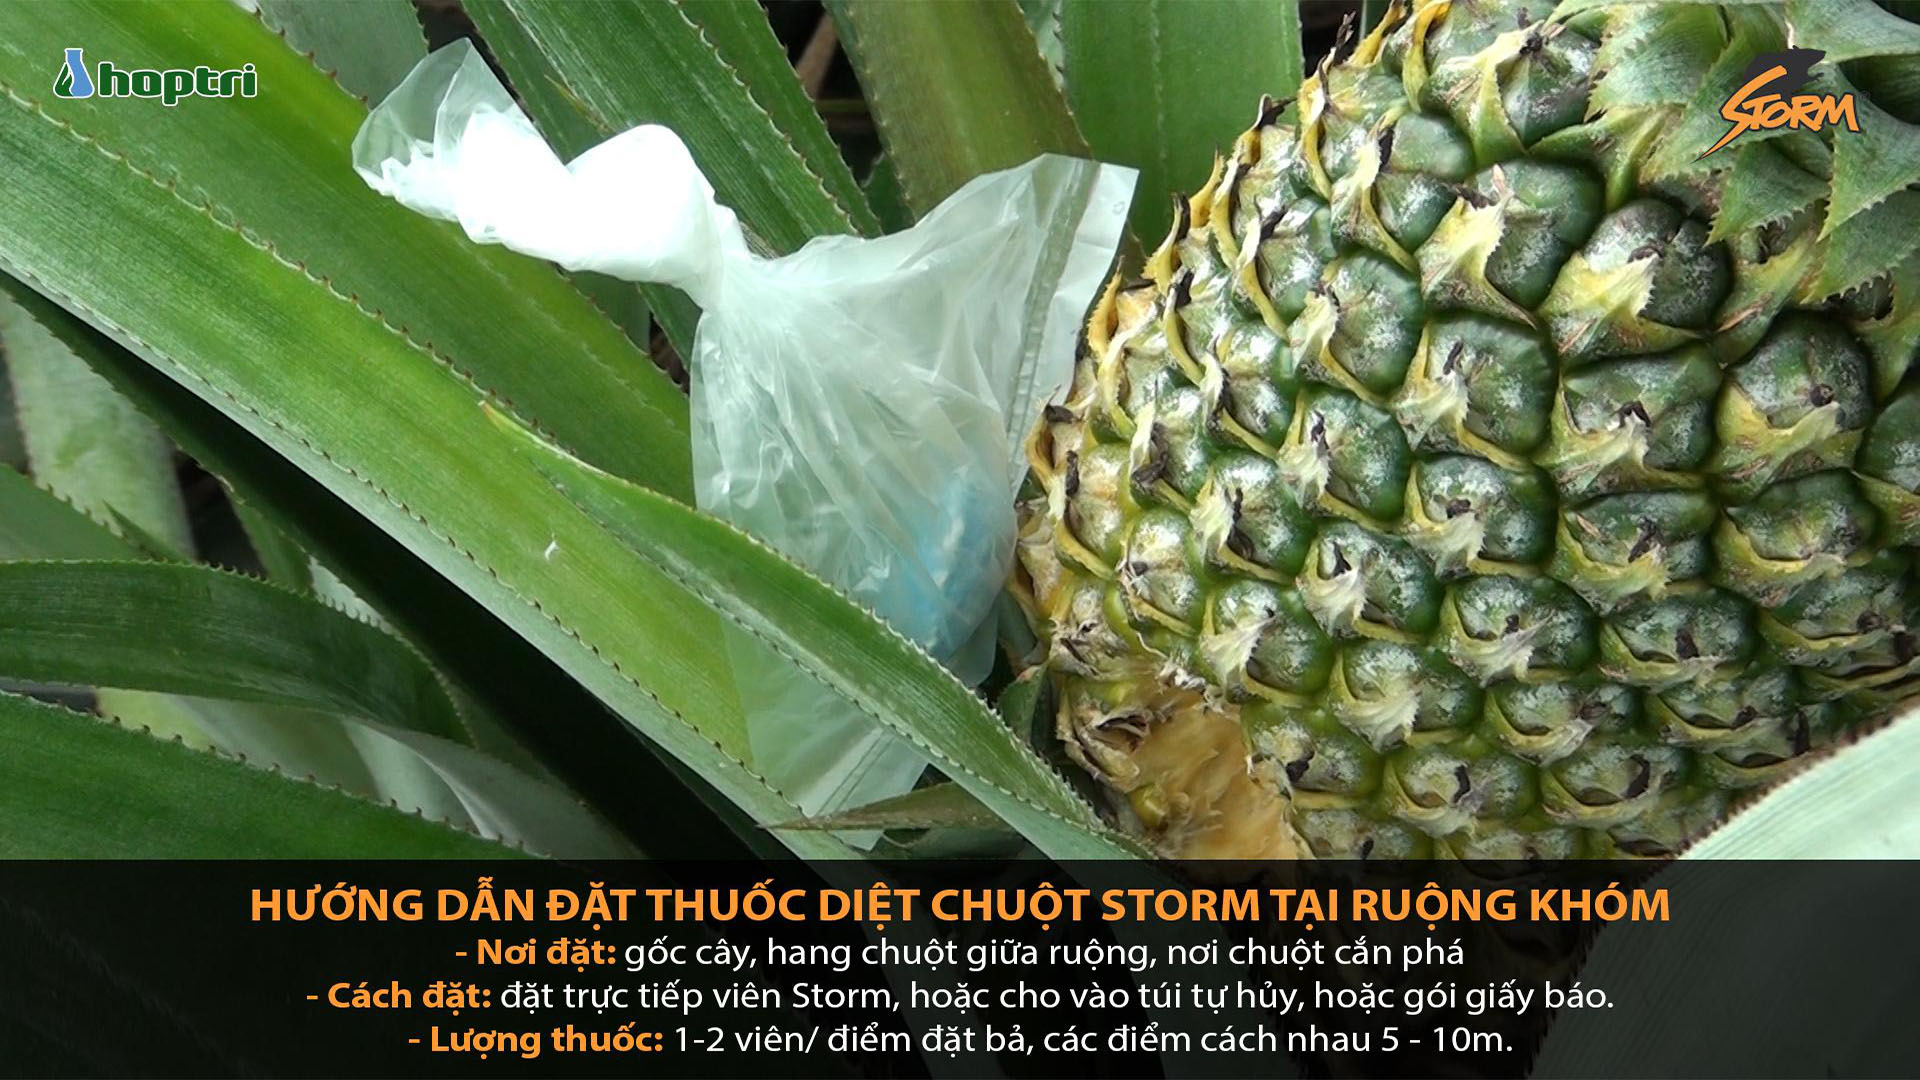 cach su dung thuoc diet chuot Storm tai ruong khom